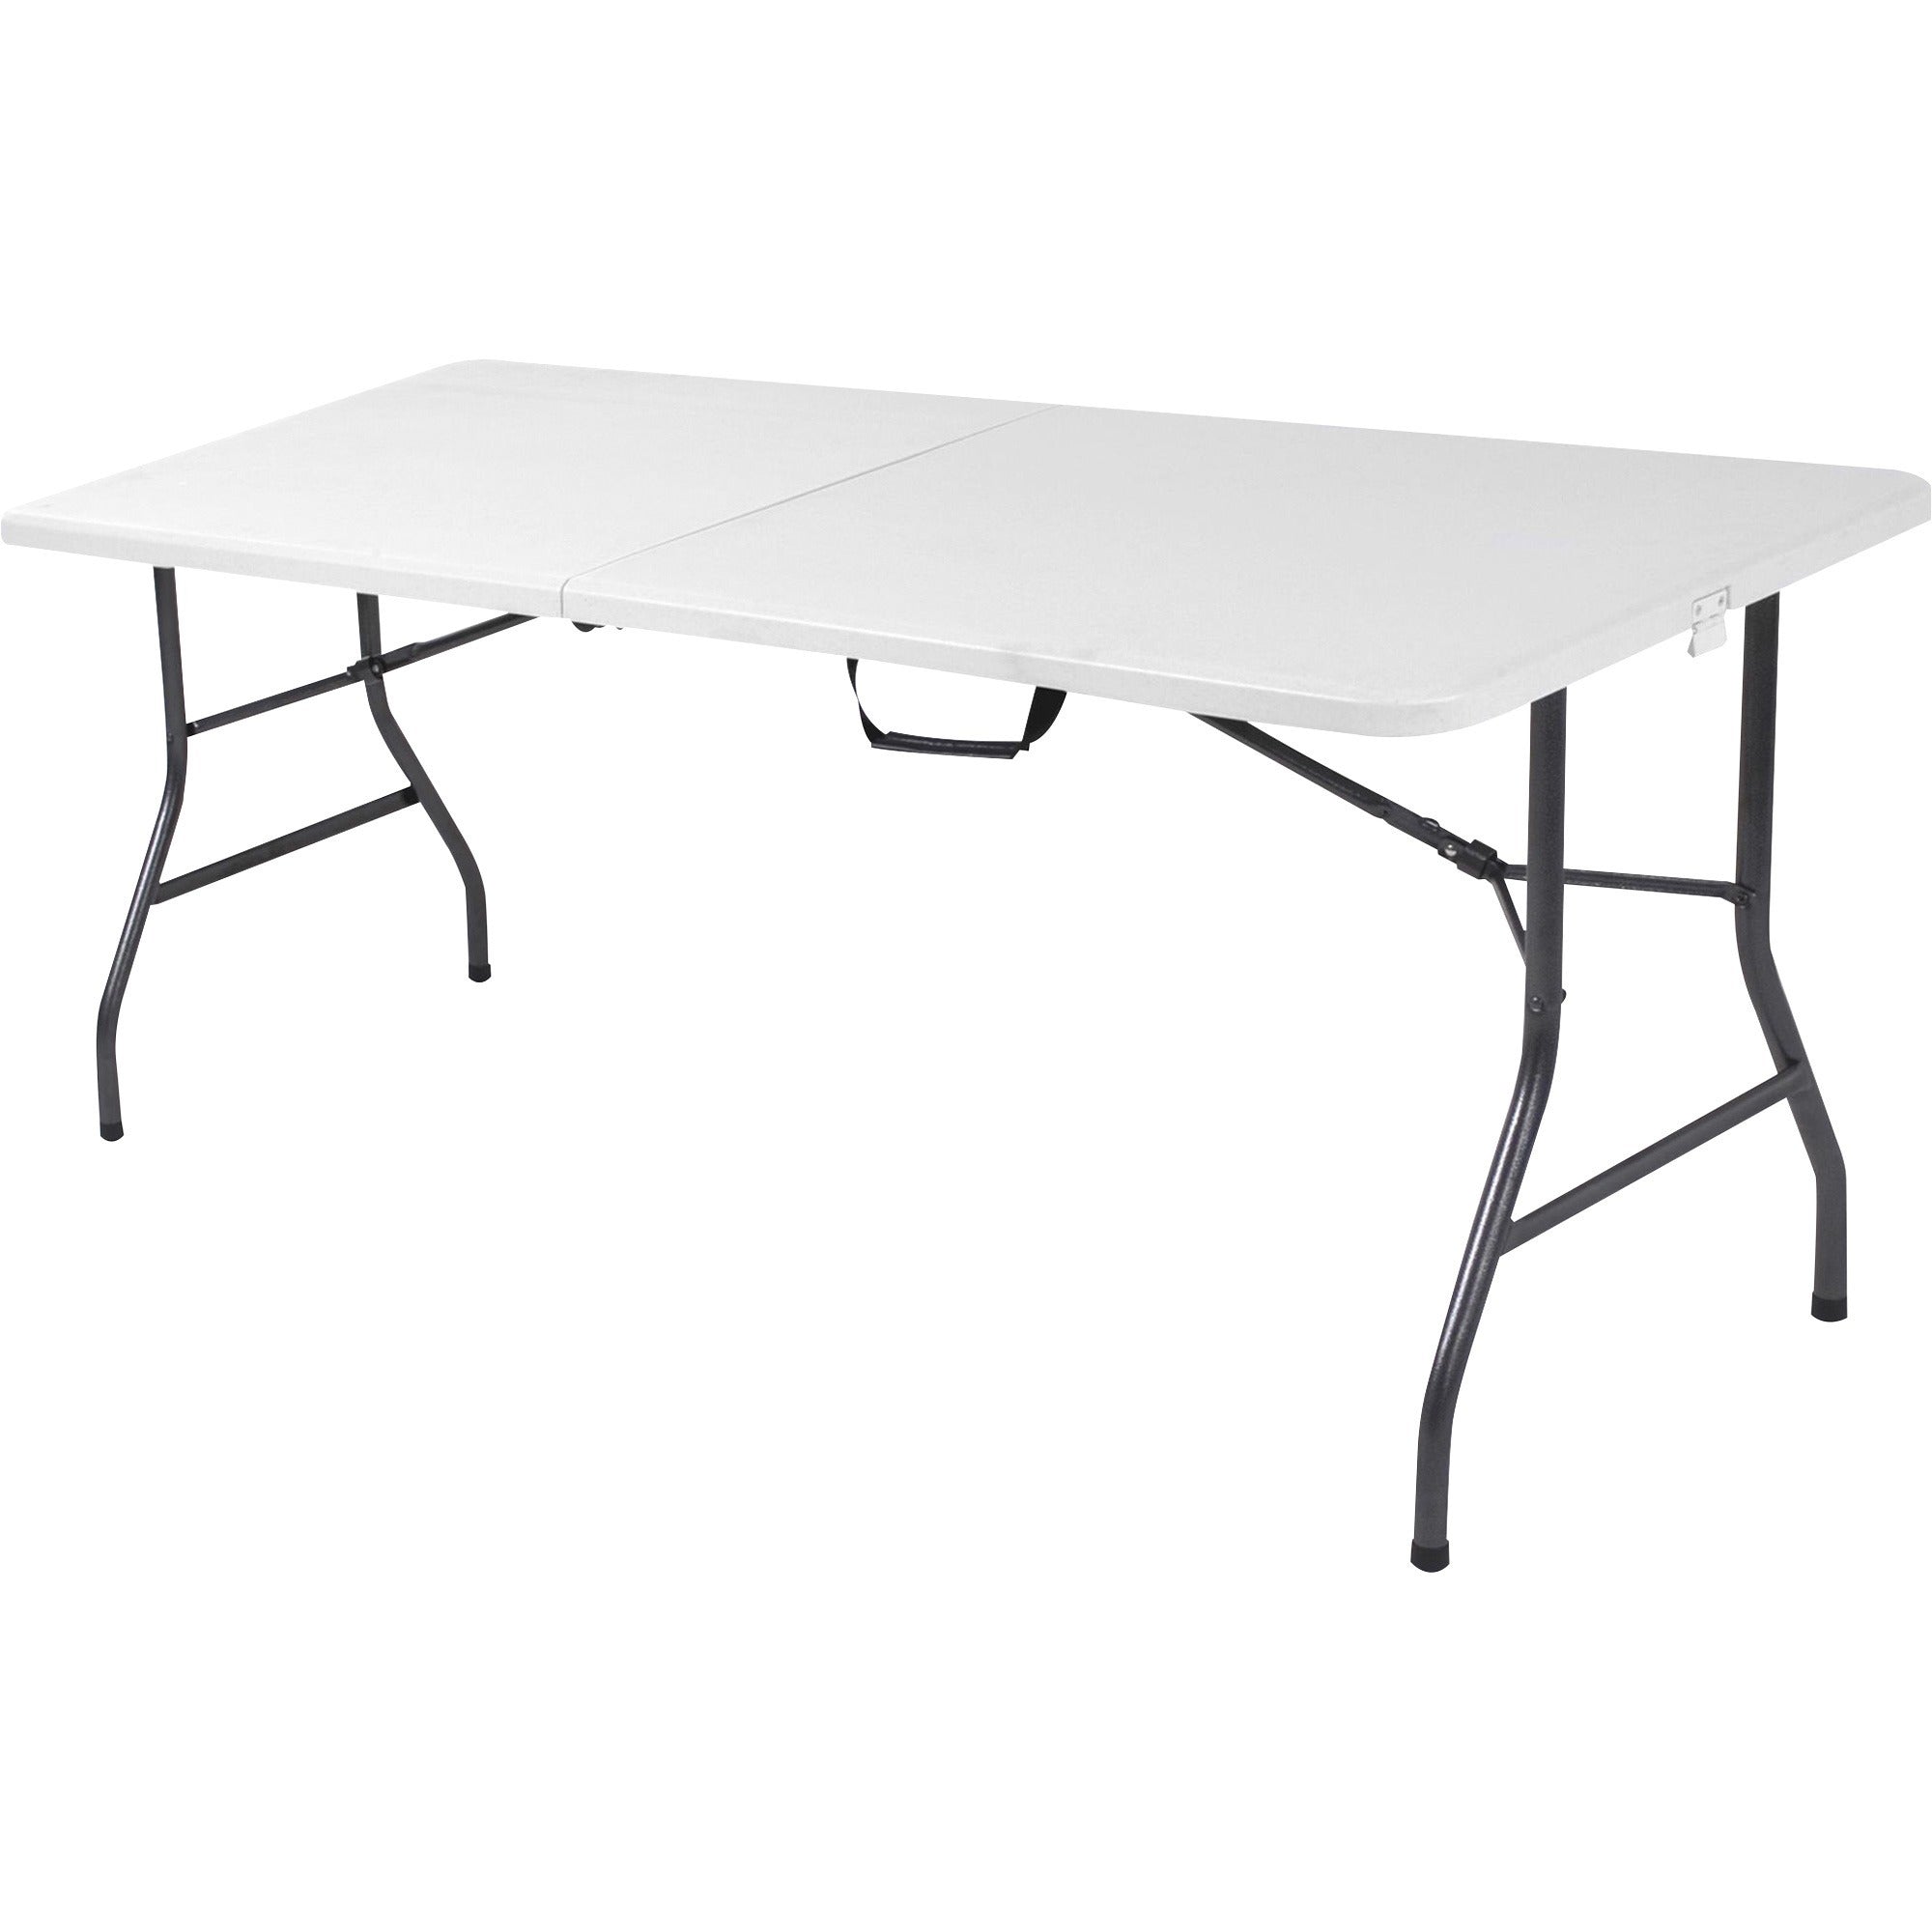 cosco-6-foot-centerfold-blow-molded-folding-table-for-table-toprectangle-top-folding-base-x-2963-table-top-width-x-72-table-top-depth-2925-height-white-1-each_csc14678wsp1 - 1